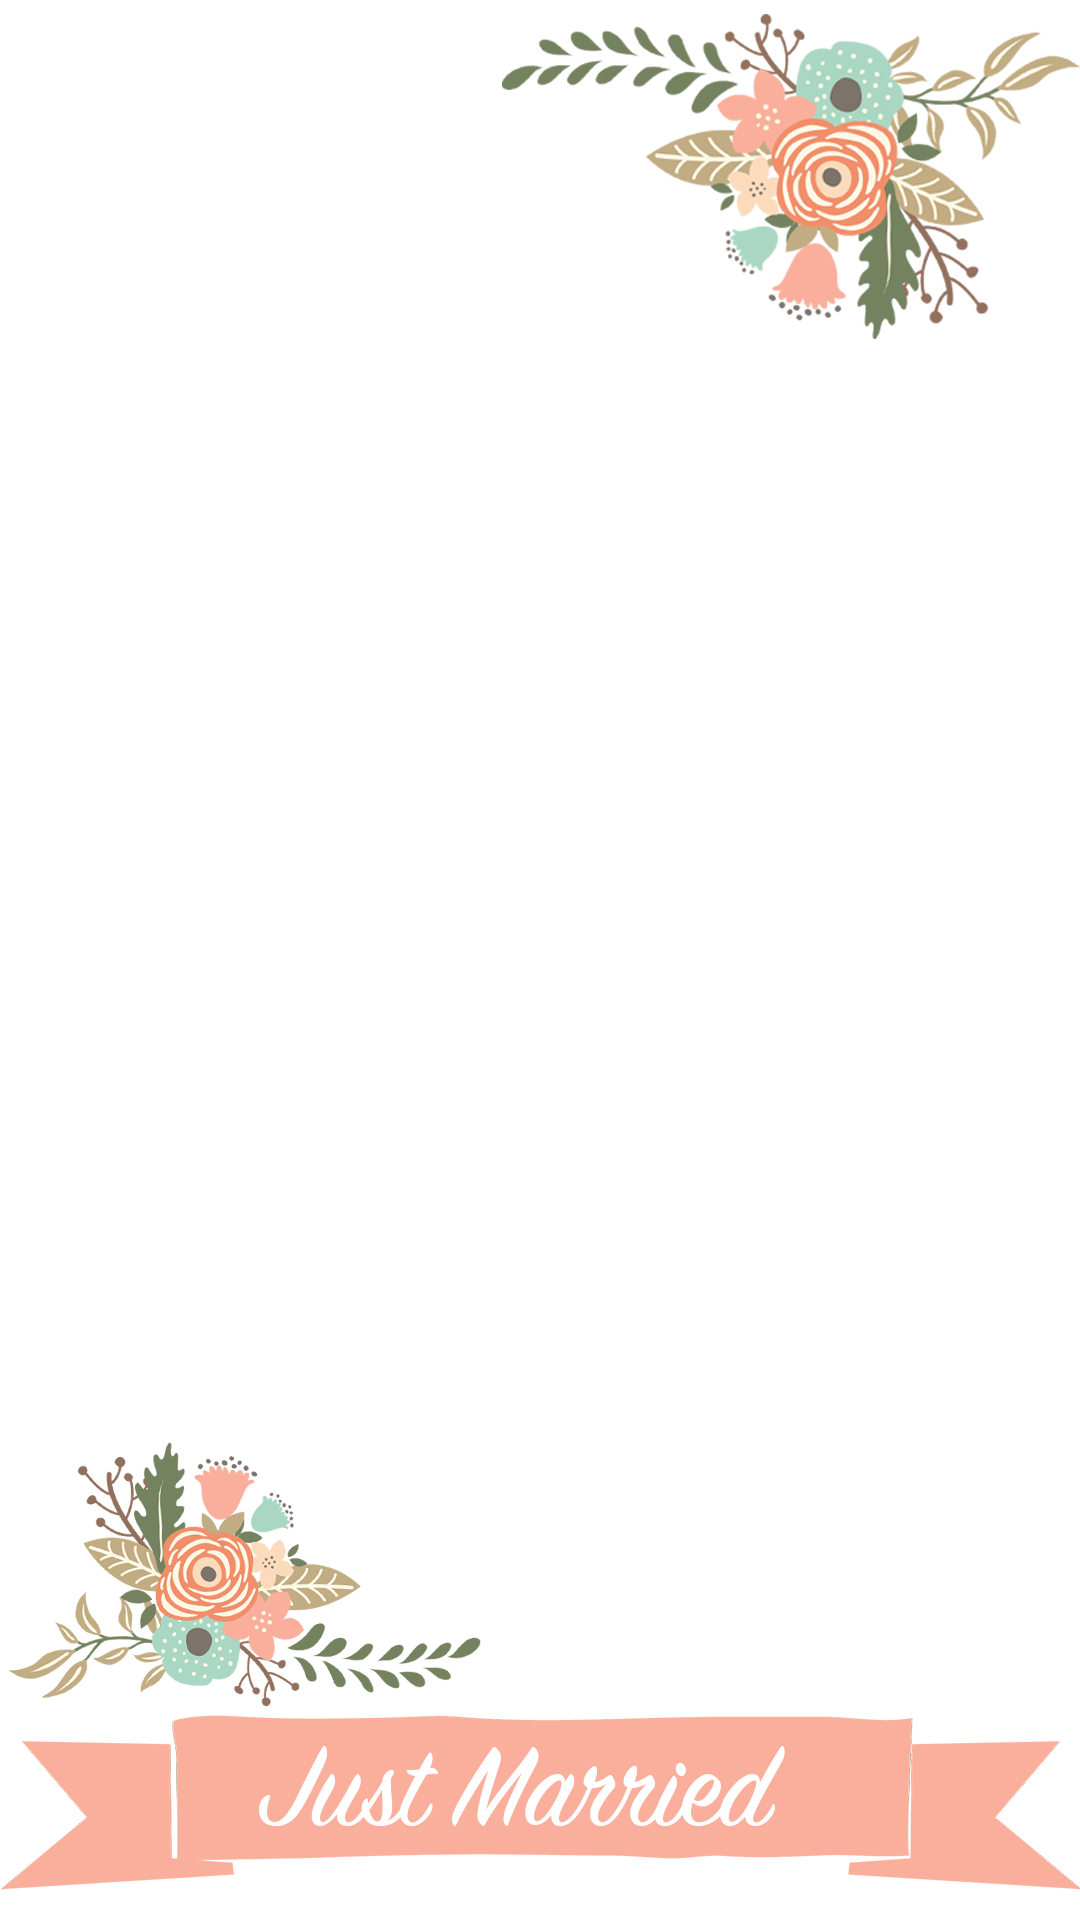 Download PNG image - Snapchat Filter Effect PNG Picture 